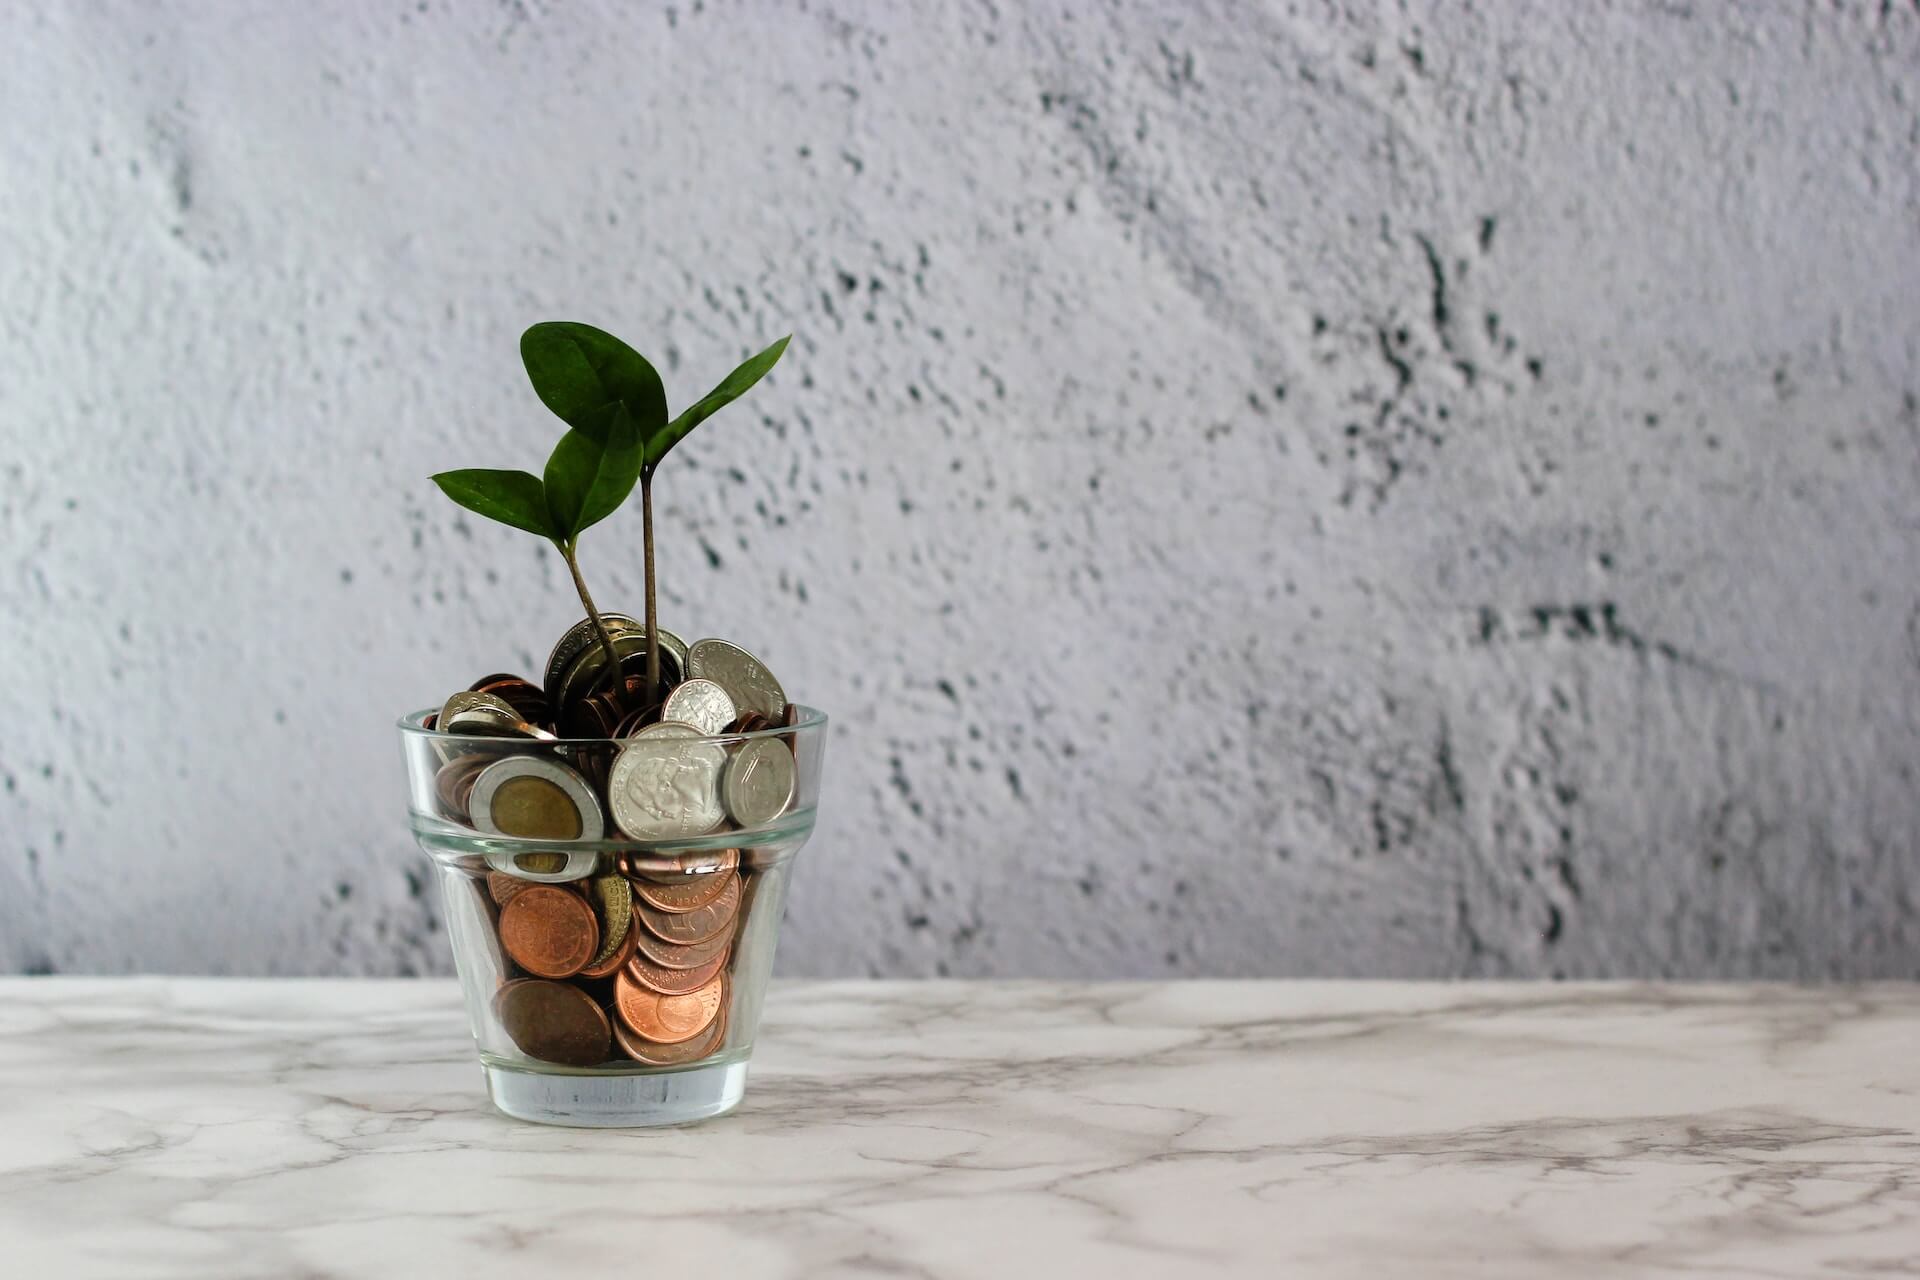 A plant growing in a pot filled with coins